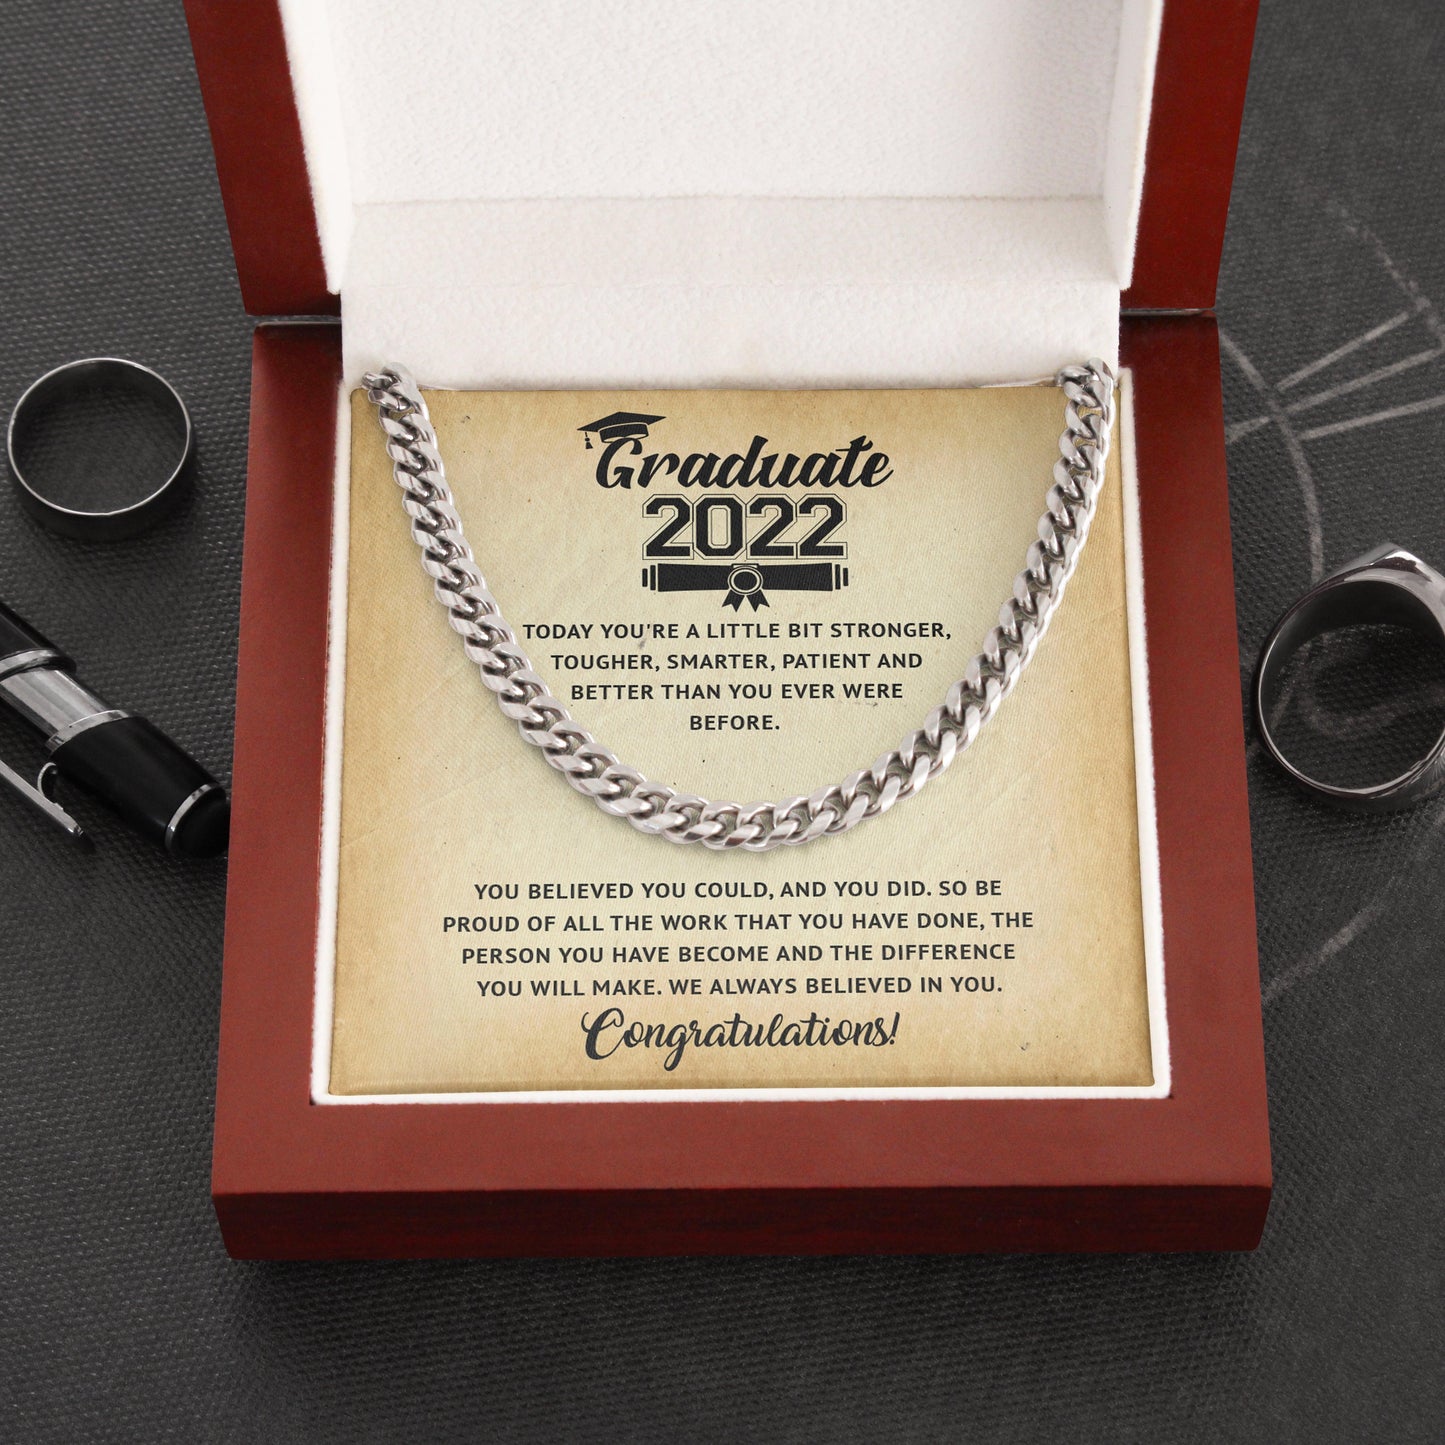 Jewelry gifts Graduation 2022 - New Horizonts - Cuban Link Chain - Belesmé - Memorable Jewelry Gifts 